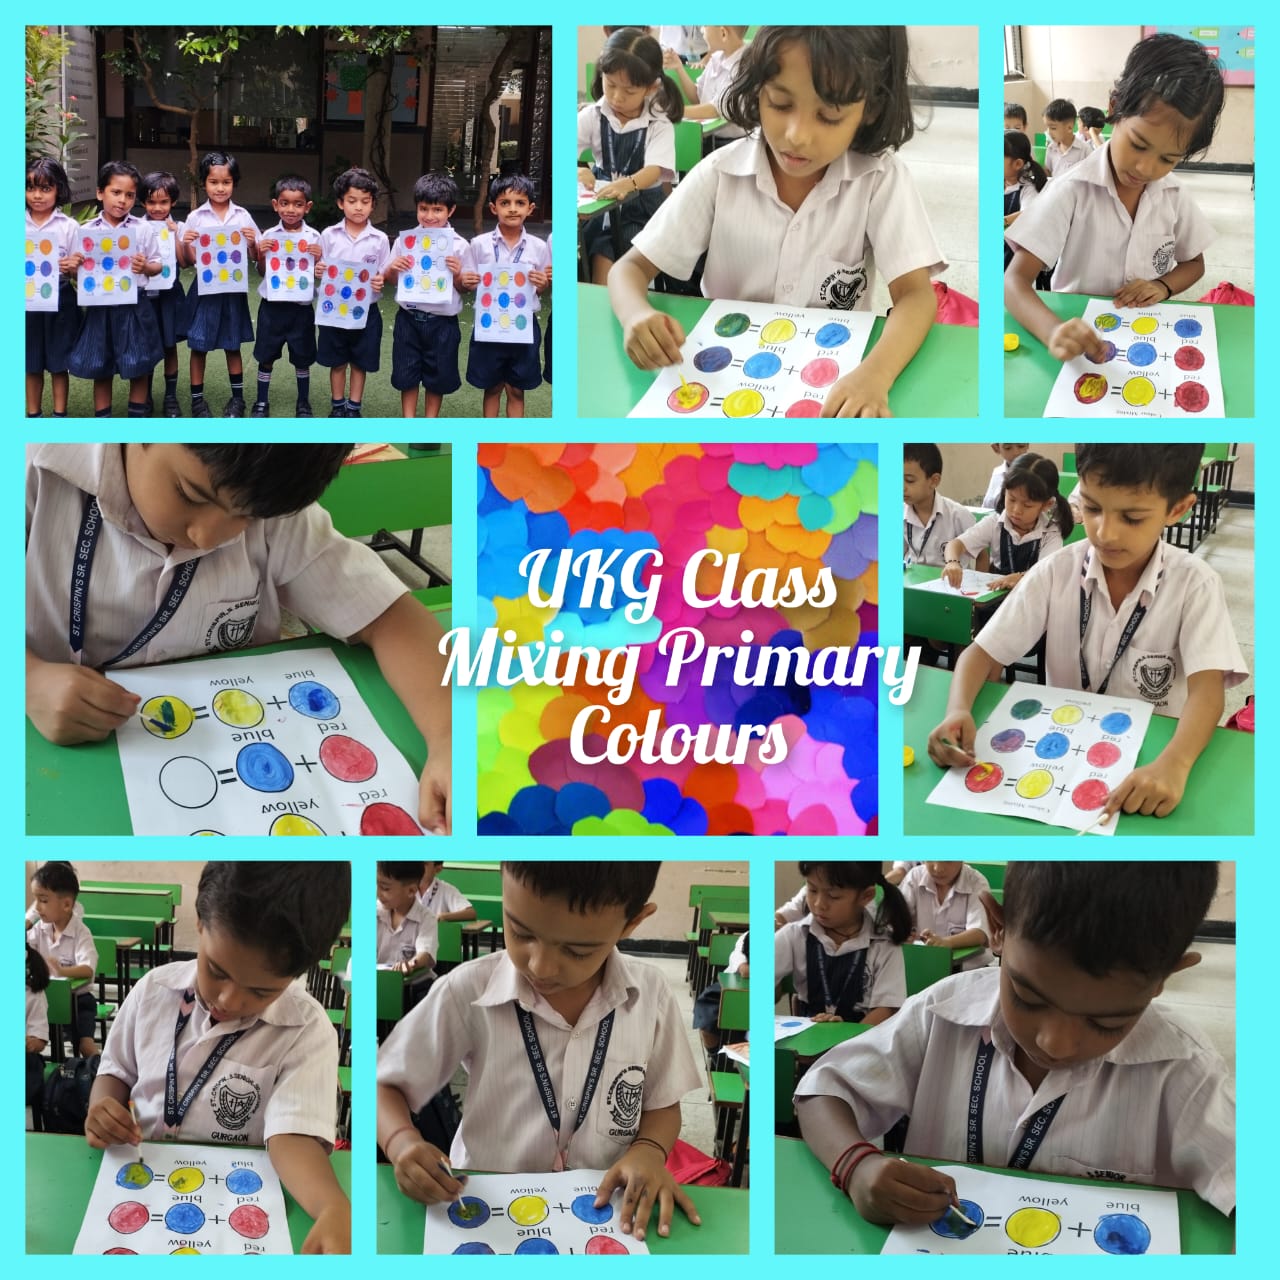 CLASS UKG-MIXING PRIMARY COLORS ACTIVITY